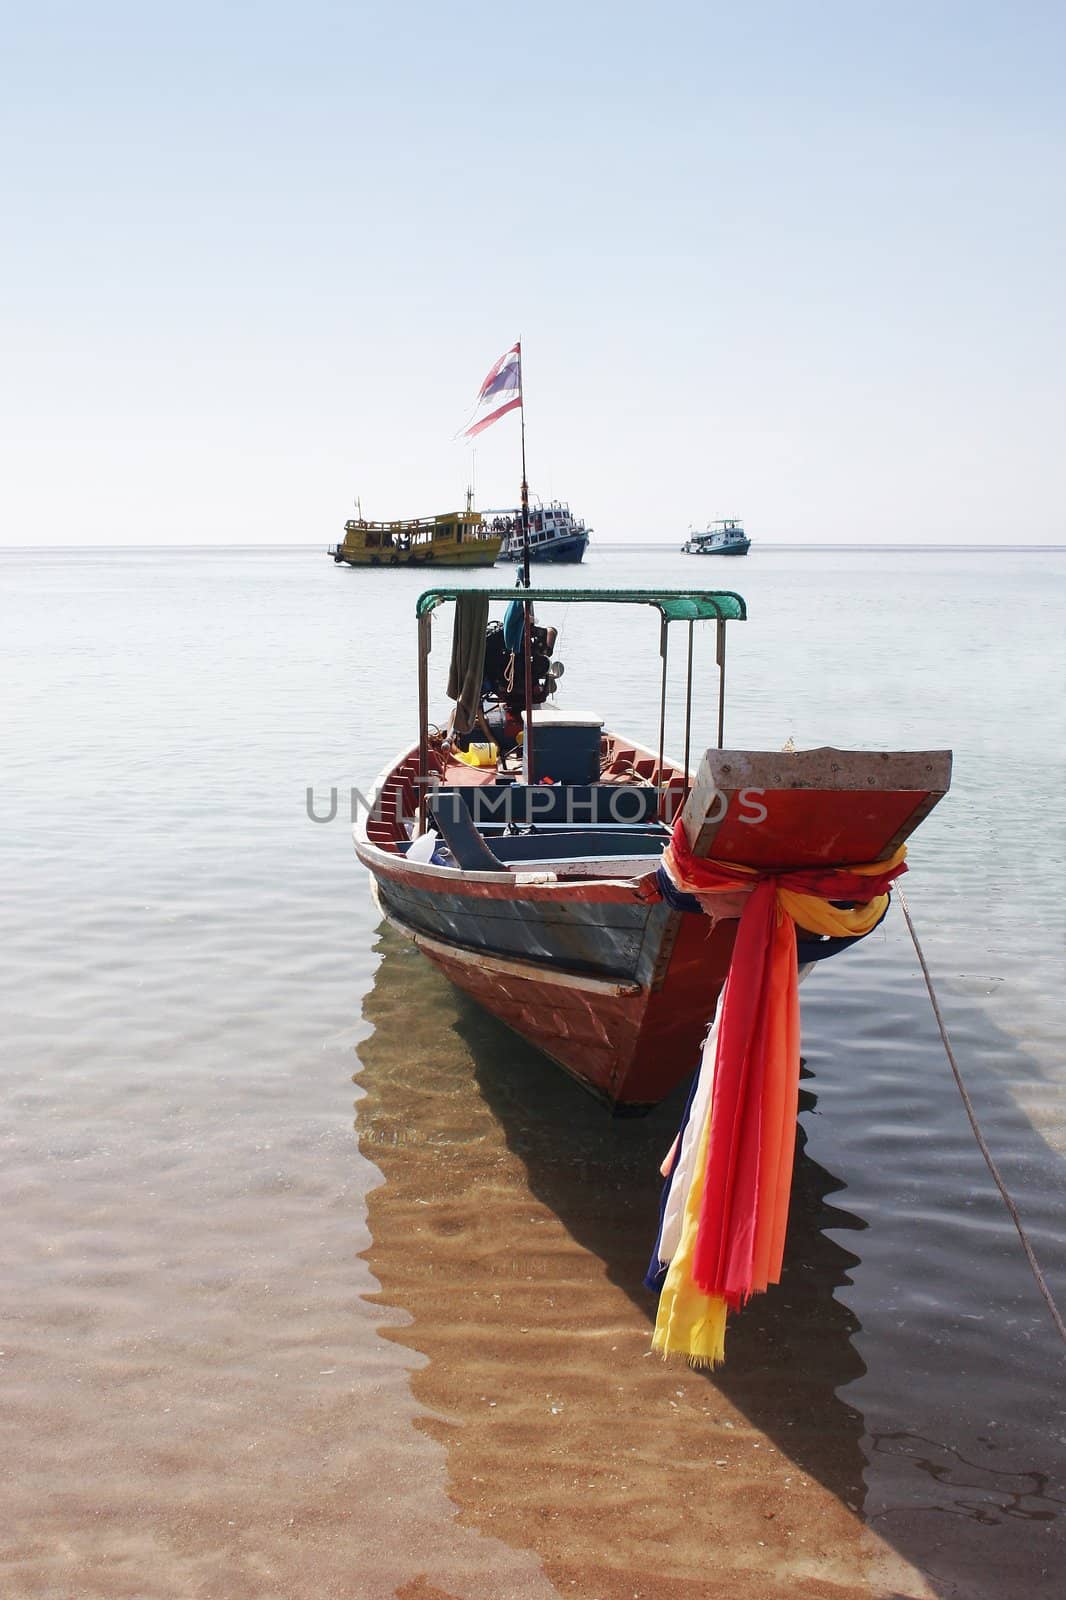 Longtail boat at Mango Bay, Koh Tao Island, Thailand - a popular place for diving and snorkelling